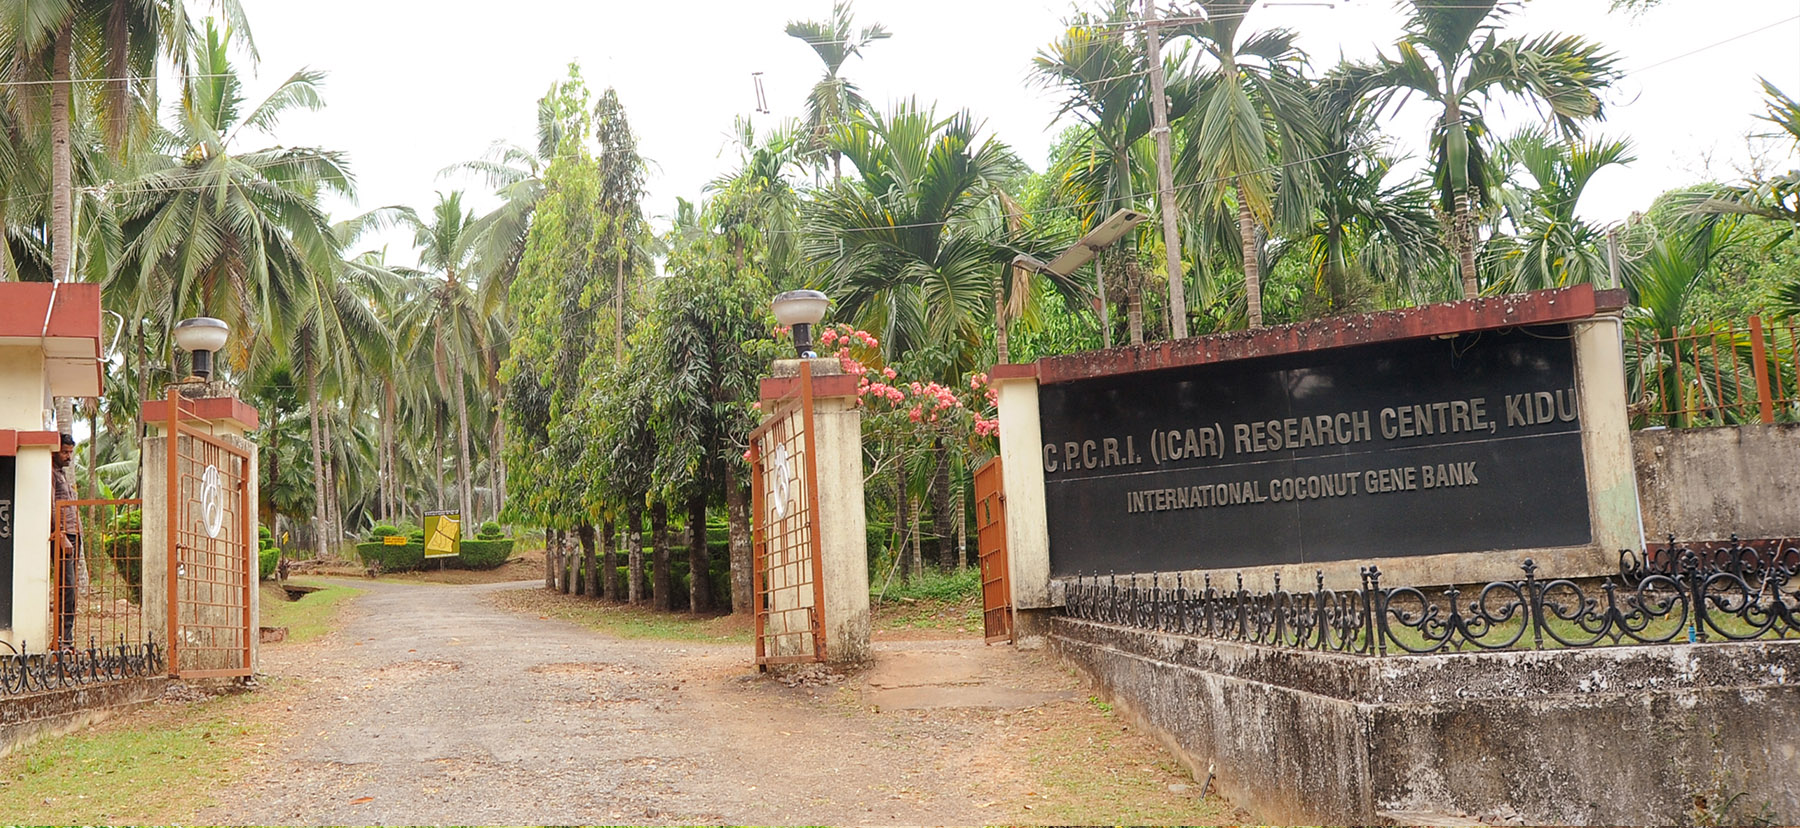 Image of Research Centre KIDU